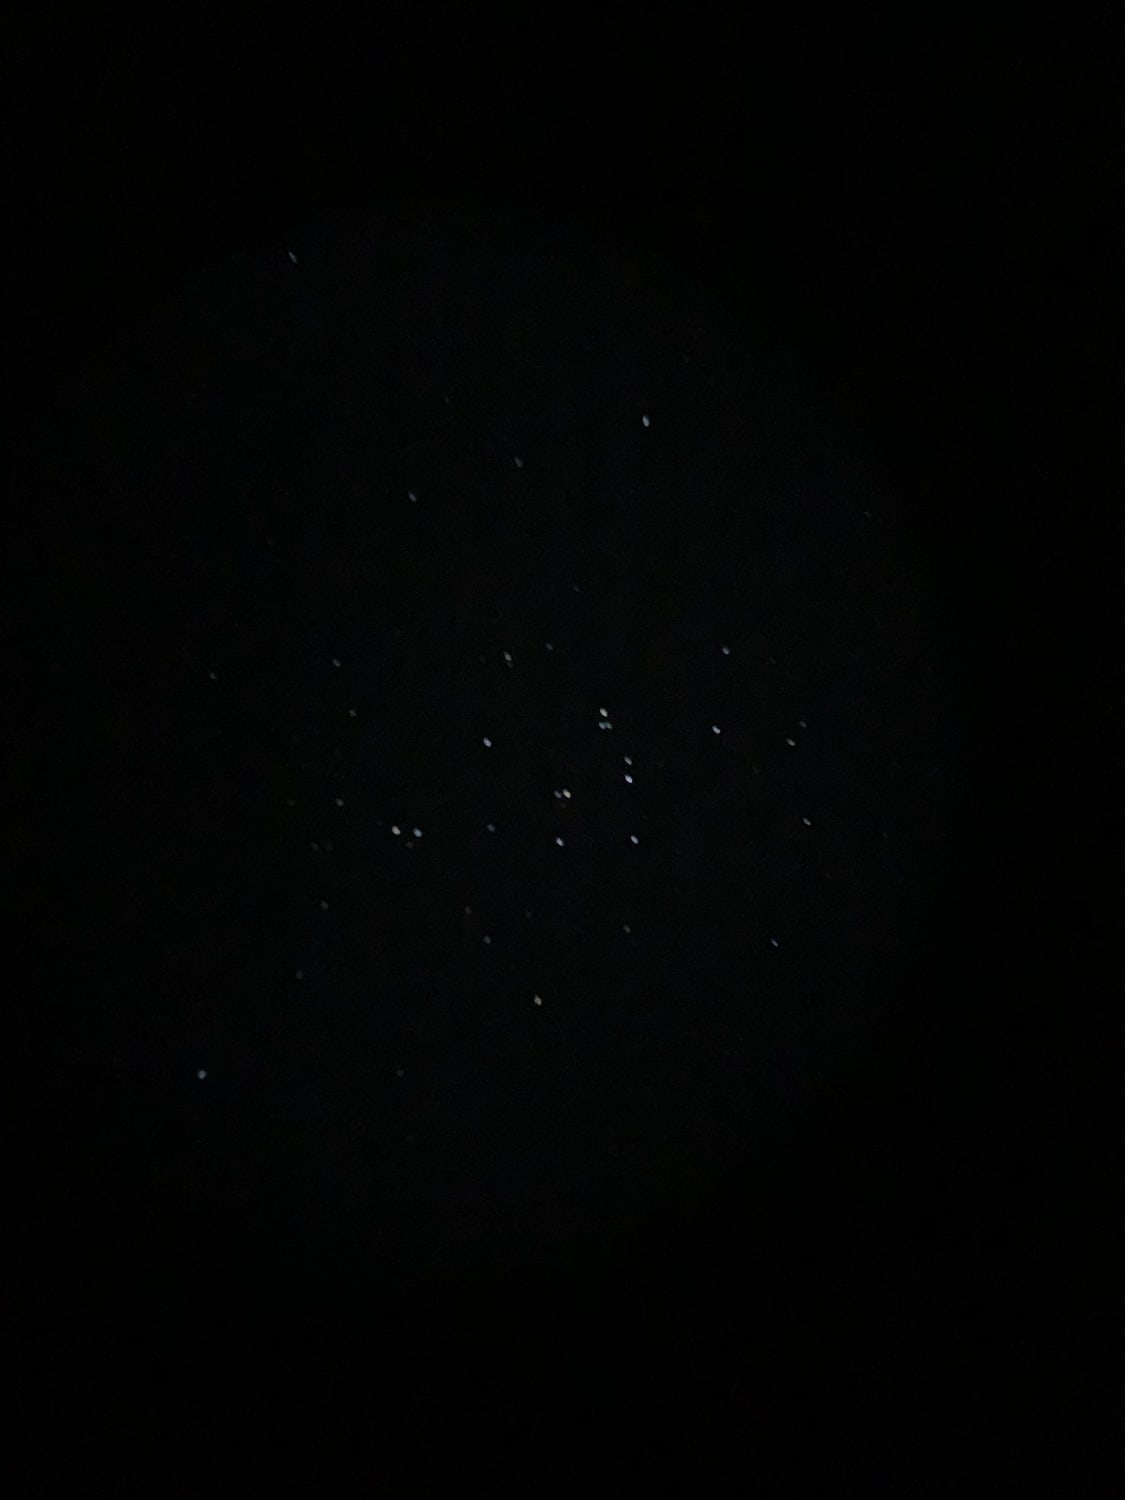 Picture of the Beehive cluster through my telescope